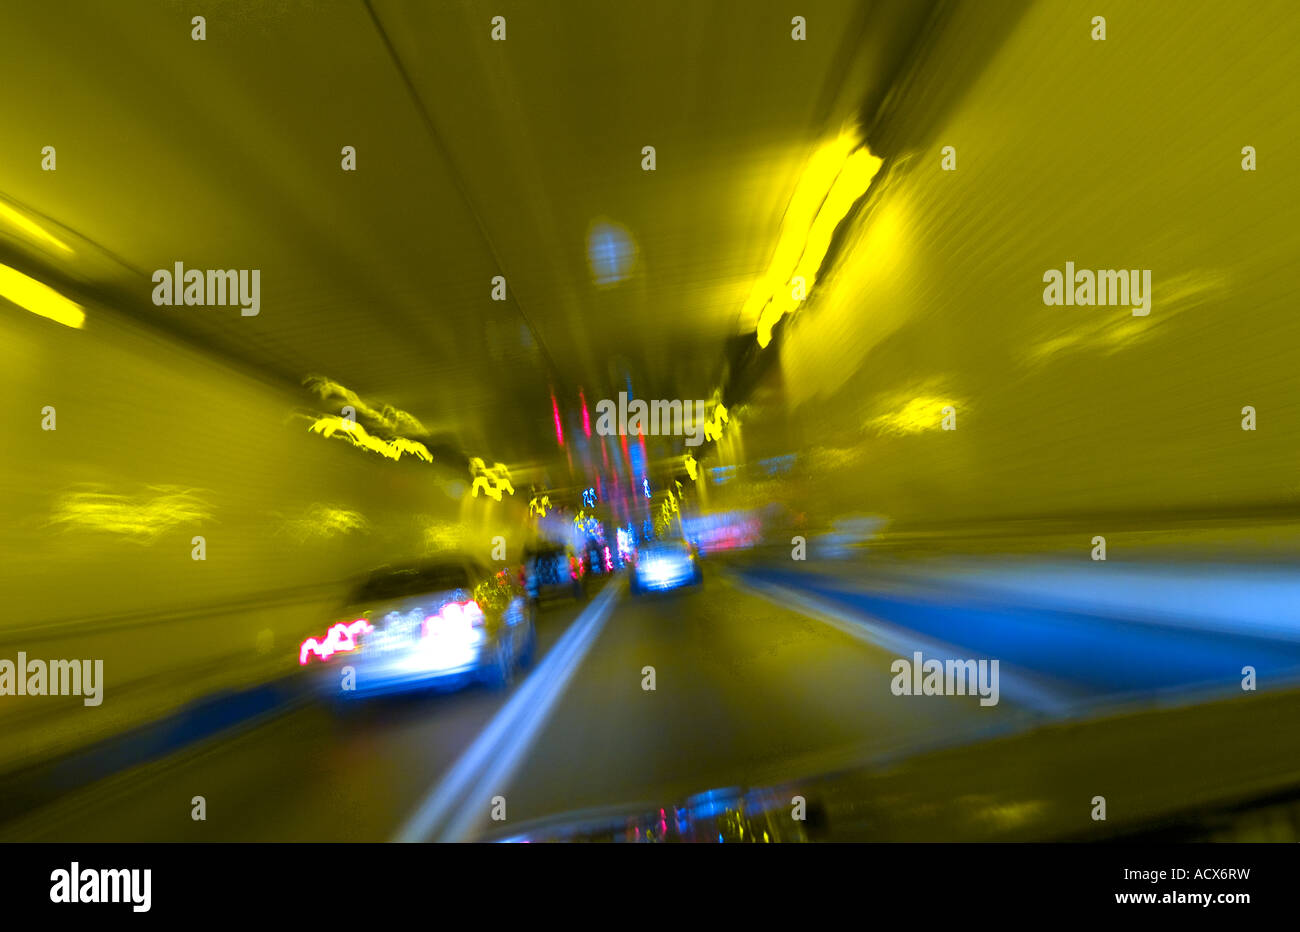 Cars In Traffic Through Tunnel With Motion Blur Stock Photo